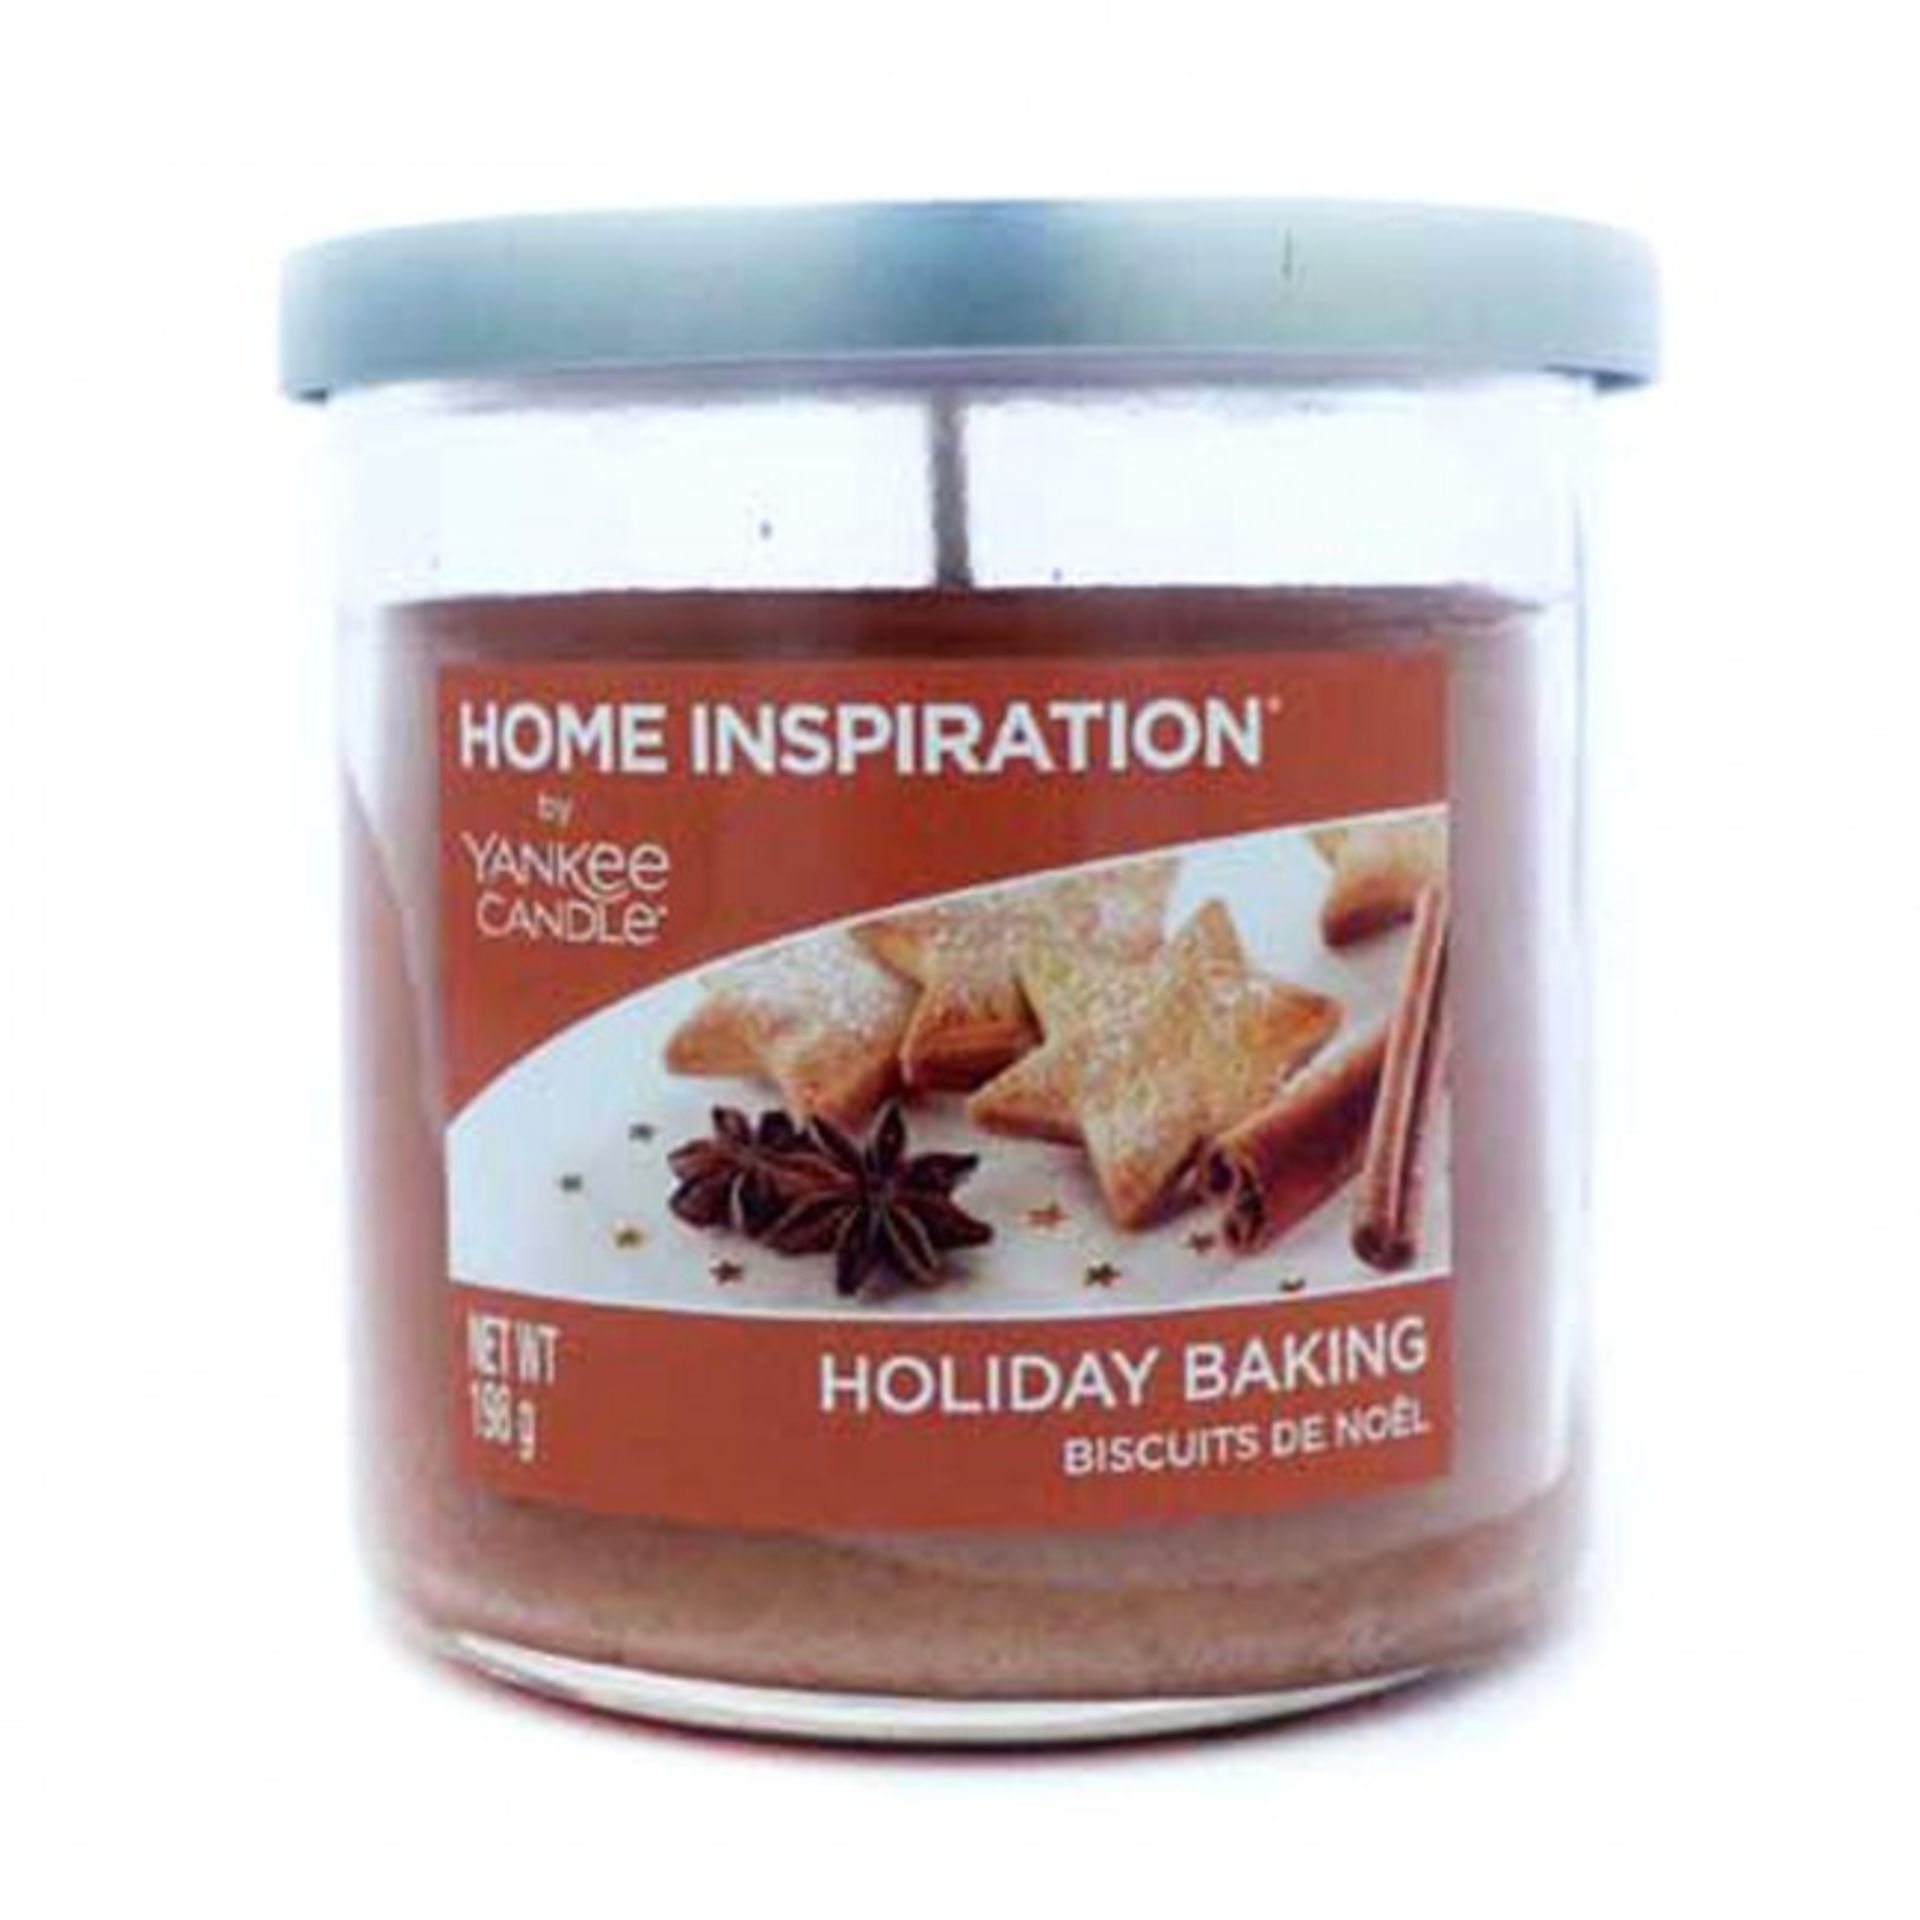 + VAT Brand New Home Inspiration by Yankee Candle Holiday Baking 198g Tumbler Candle - ISP £7.99